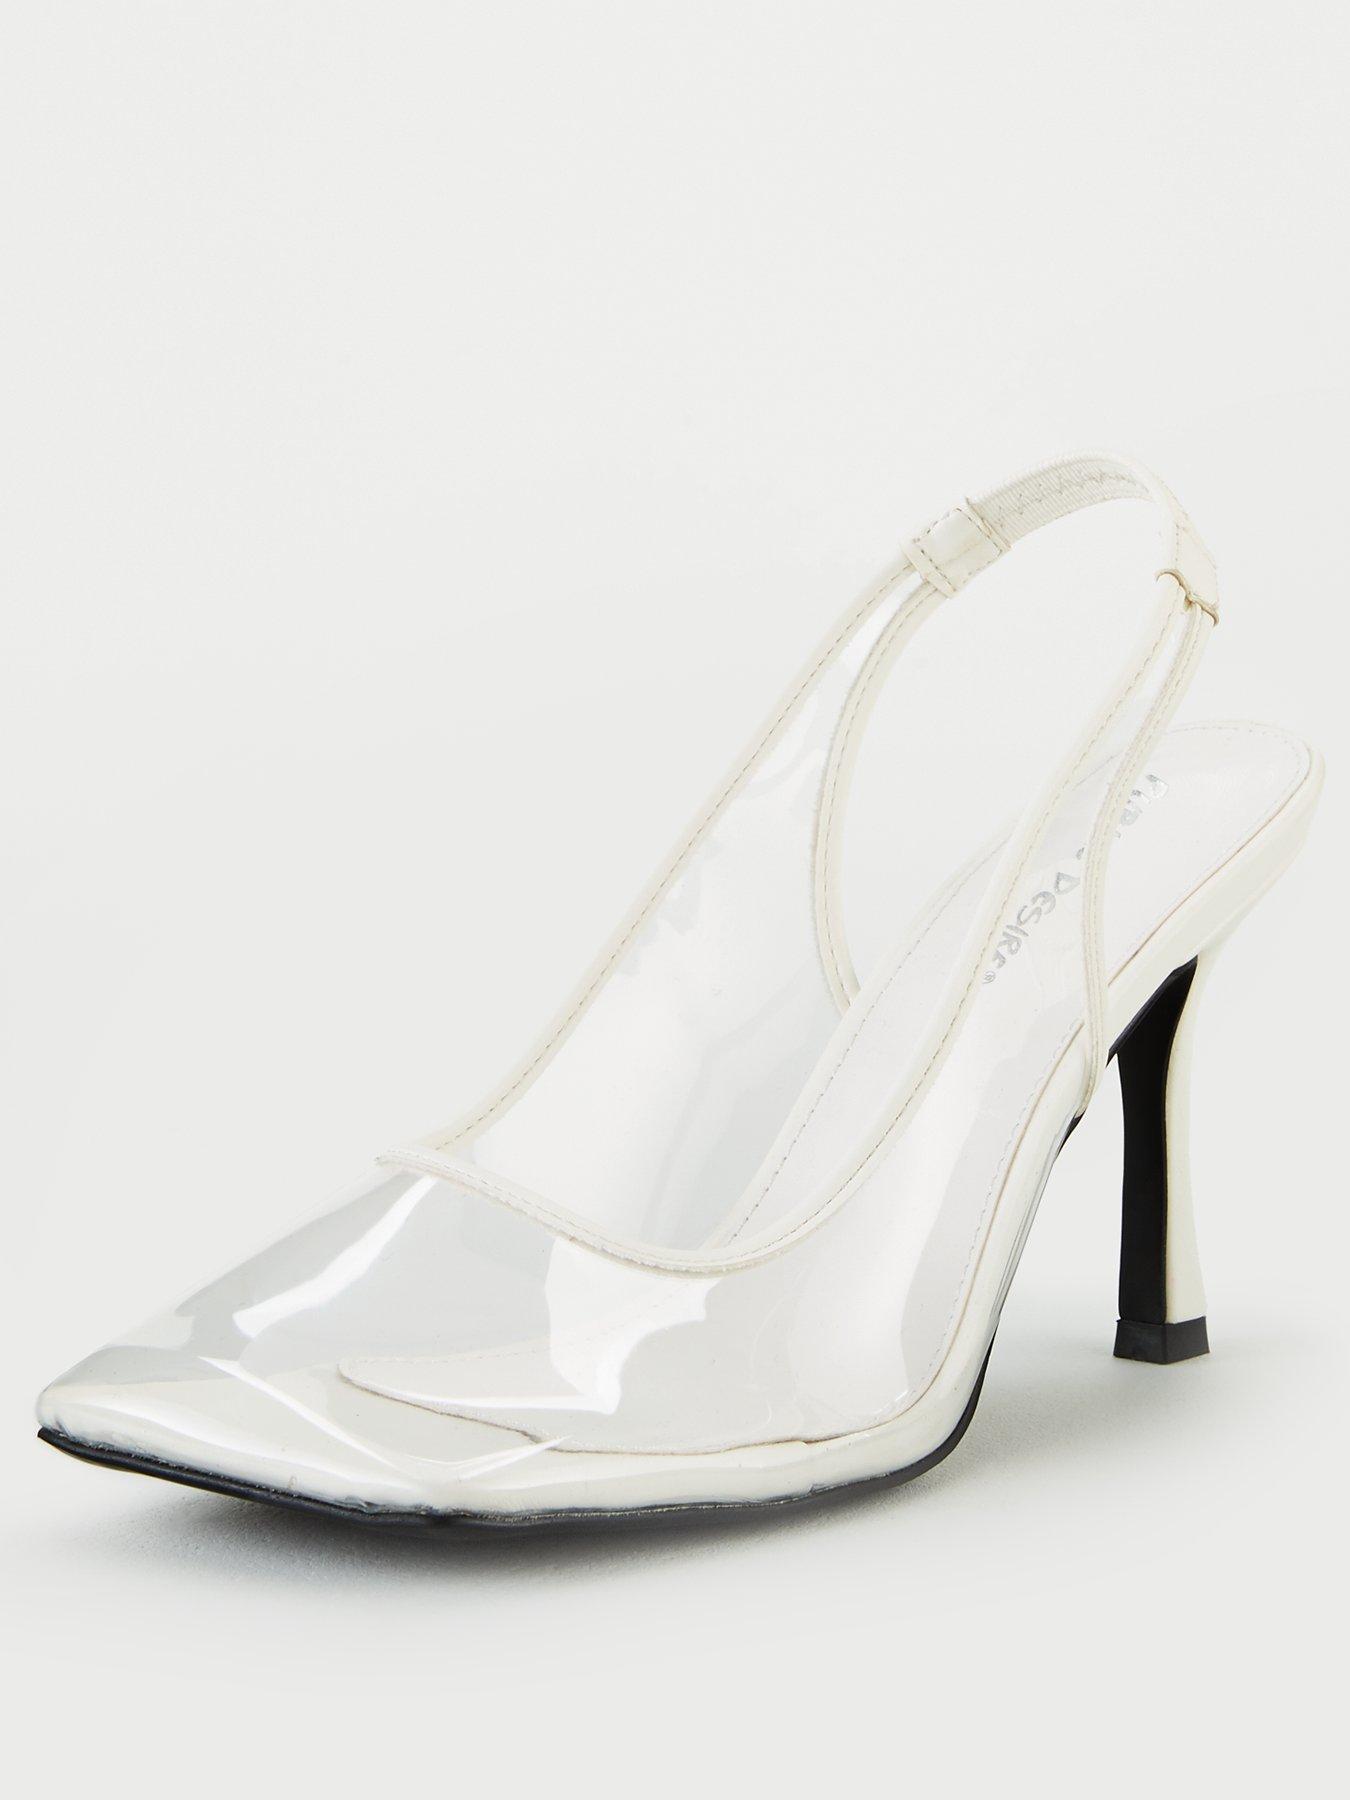 silver court shoes ireland